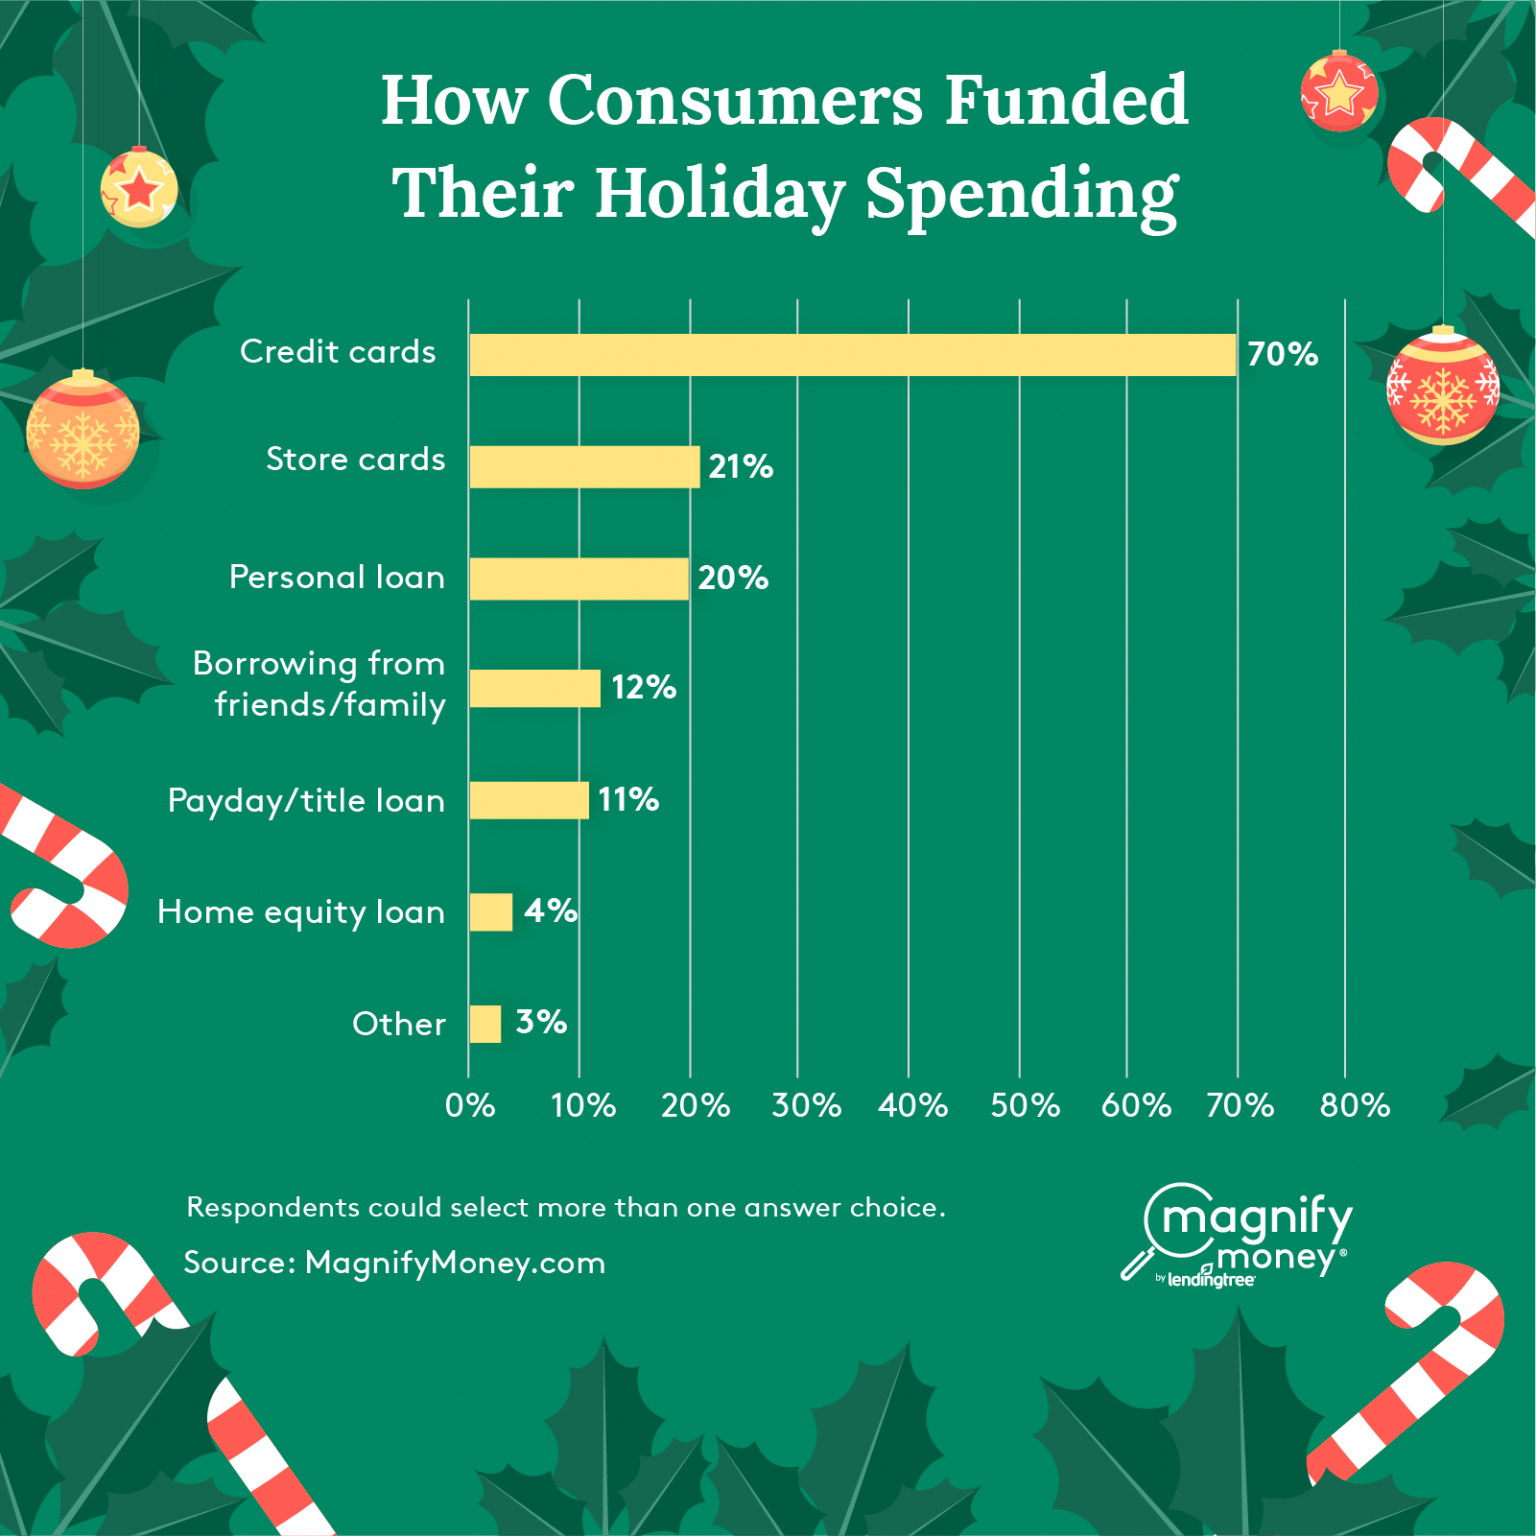 70% used credit cards for 2019 holiday shopping, and store cards and personal loans 20% each